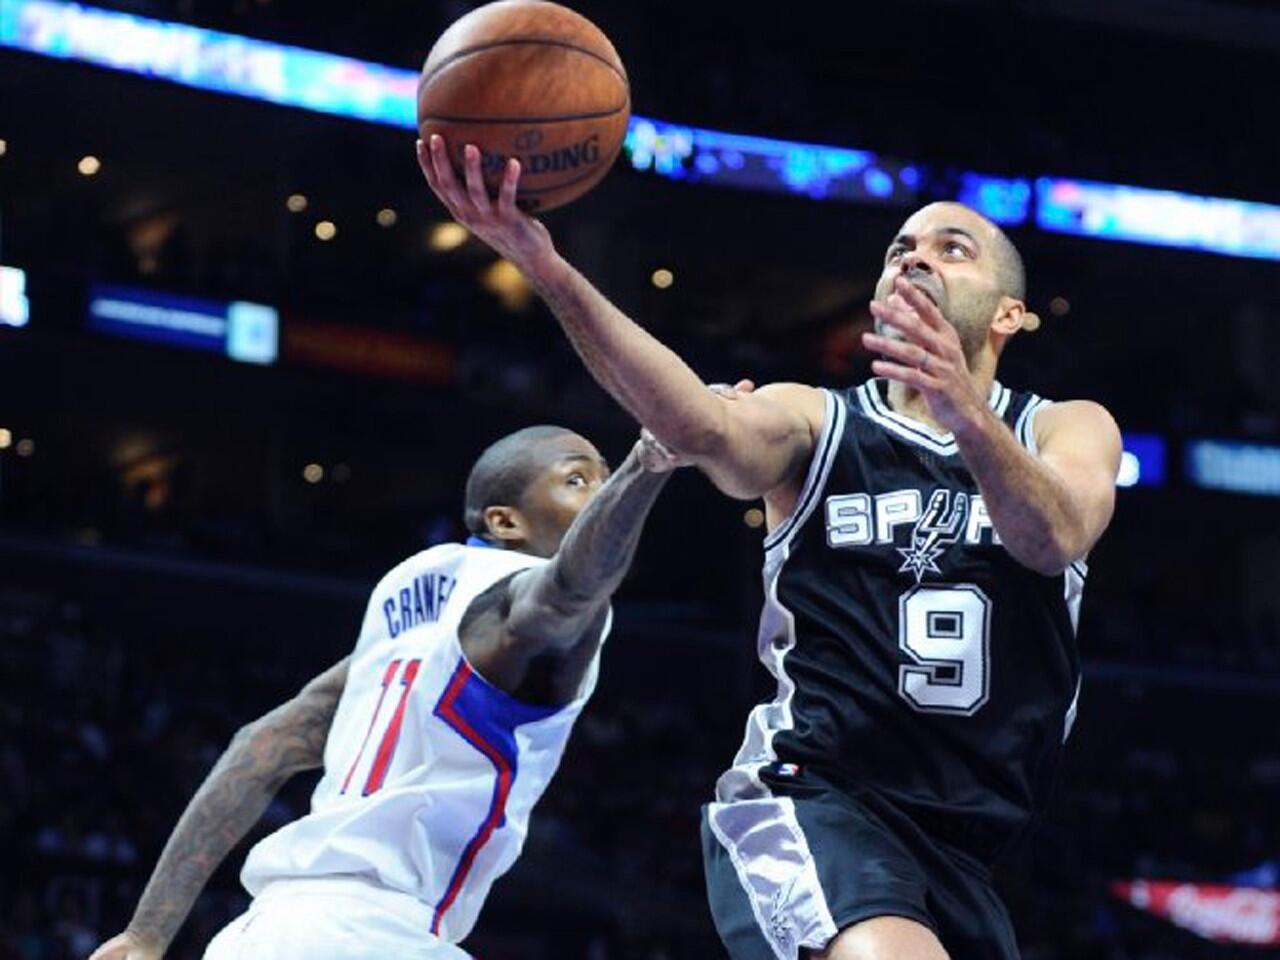 San Antonio guard Tony Parker drives past Jamal Crawford, but misses a layup during Game 5 of a playoff series matchup between the Clippers at Spurs at Staples Center.